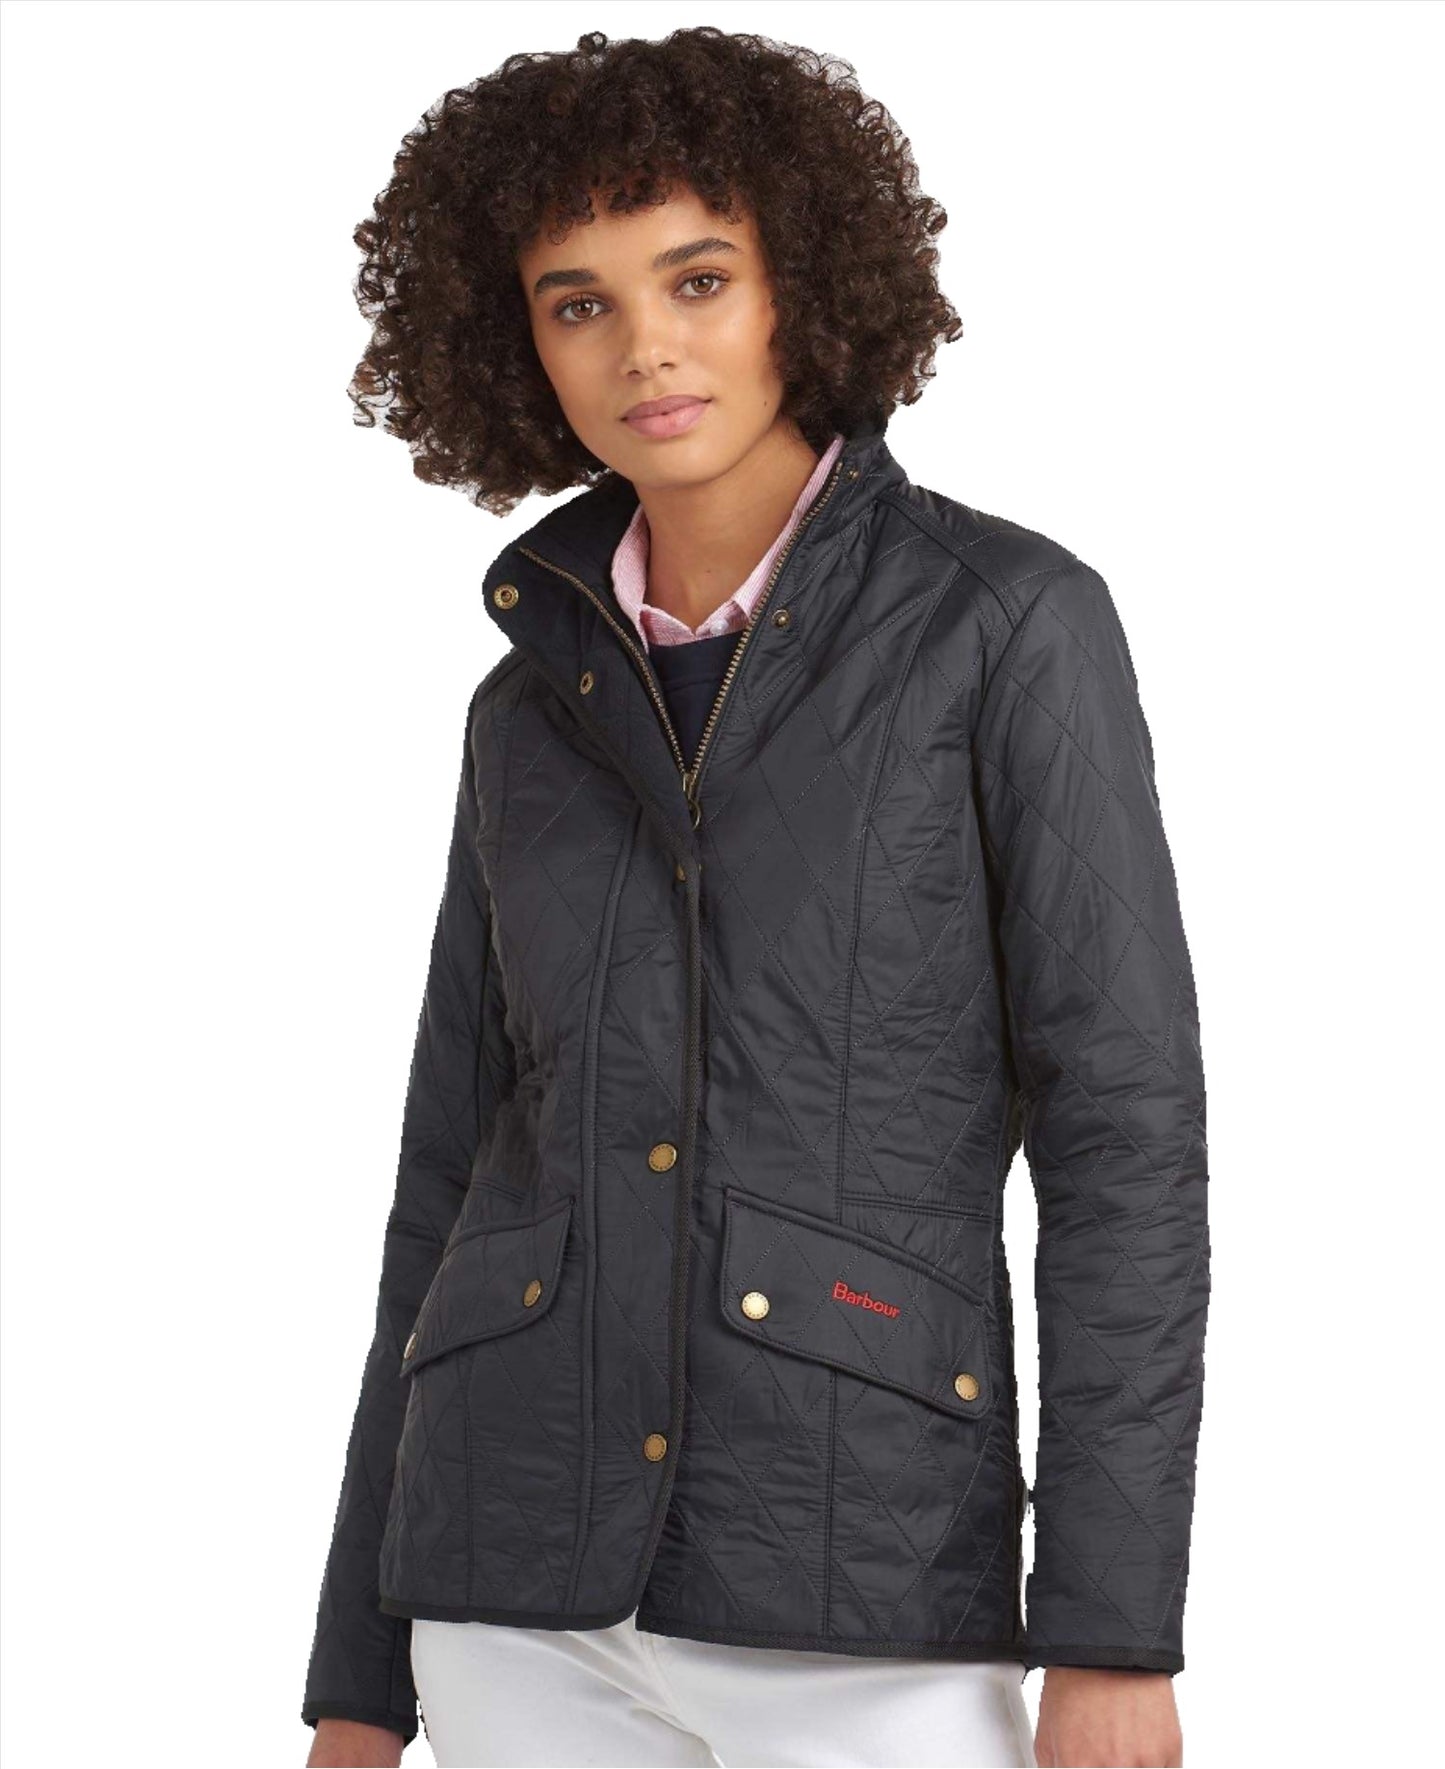 Barbour Women's Cavalry Polarquilt Jacket - The Luxury Promotional Gifts Company Limited